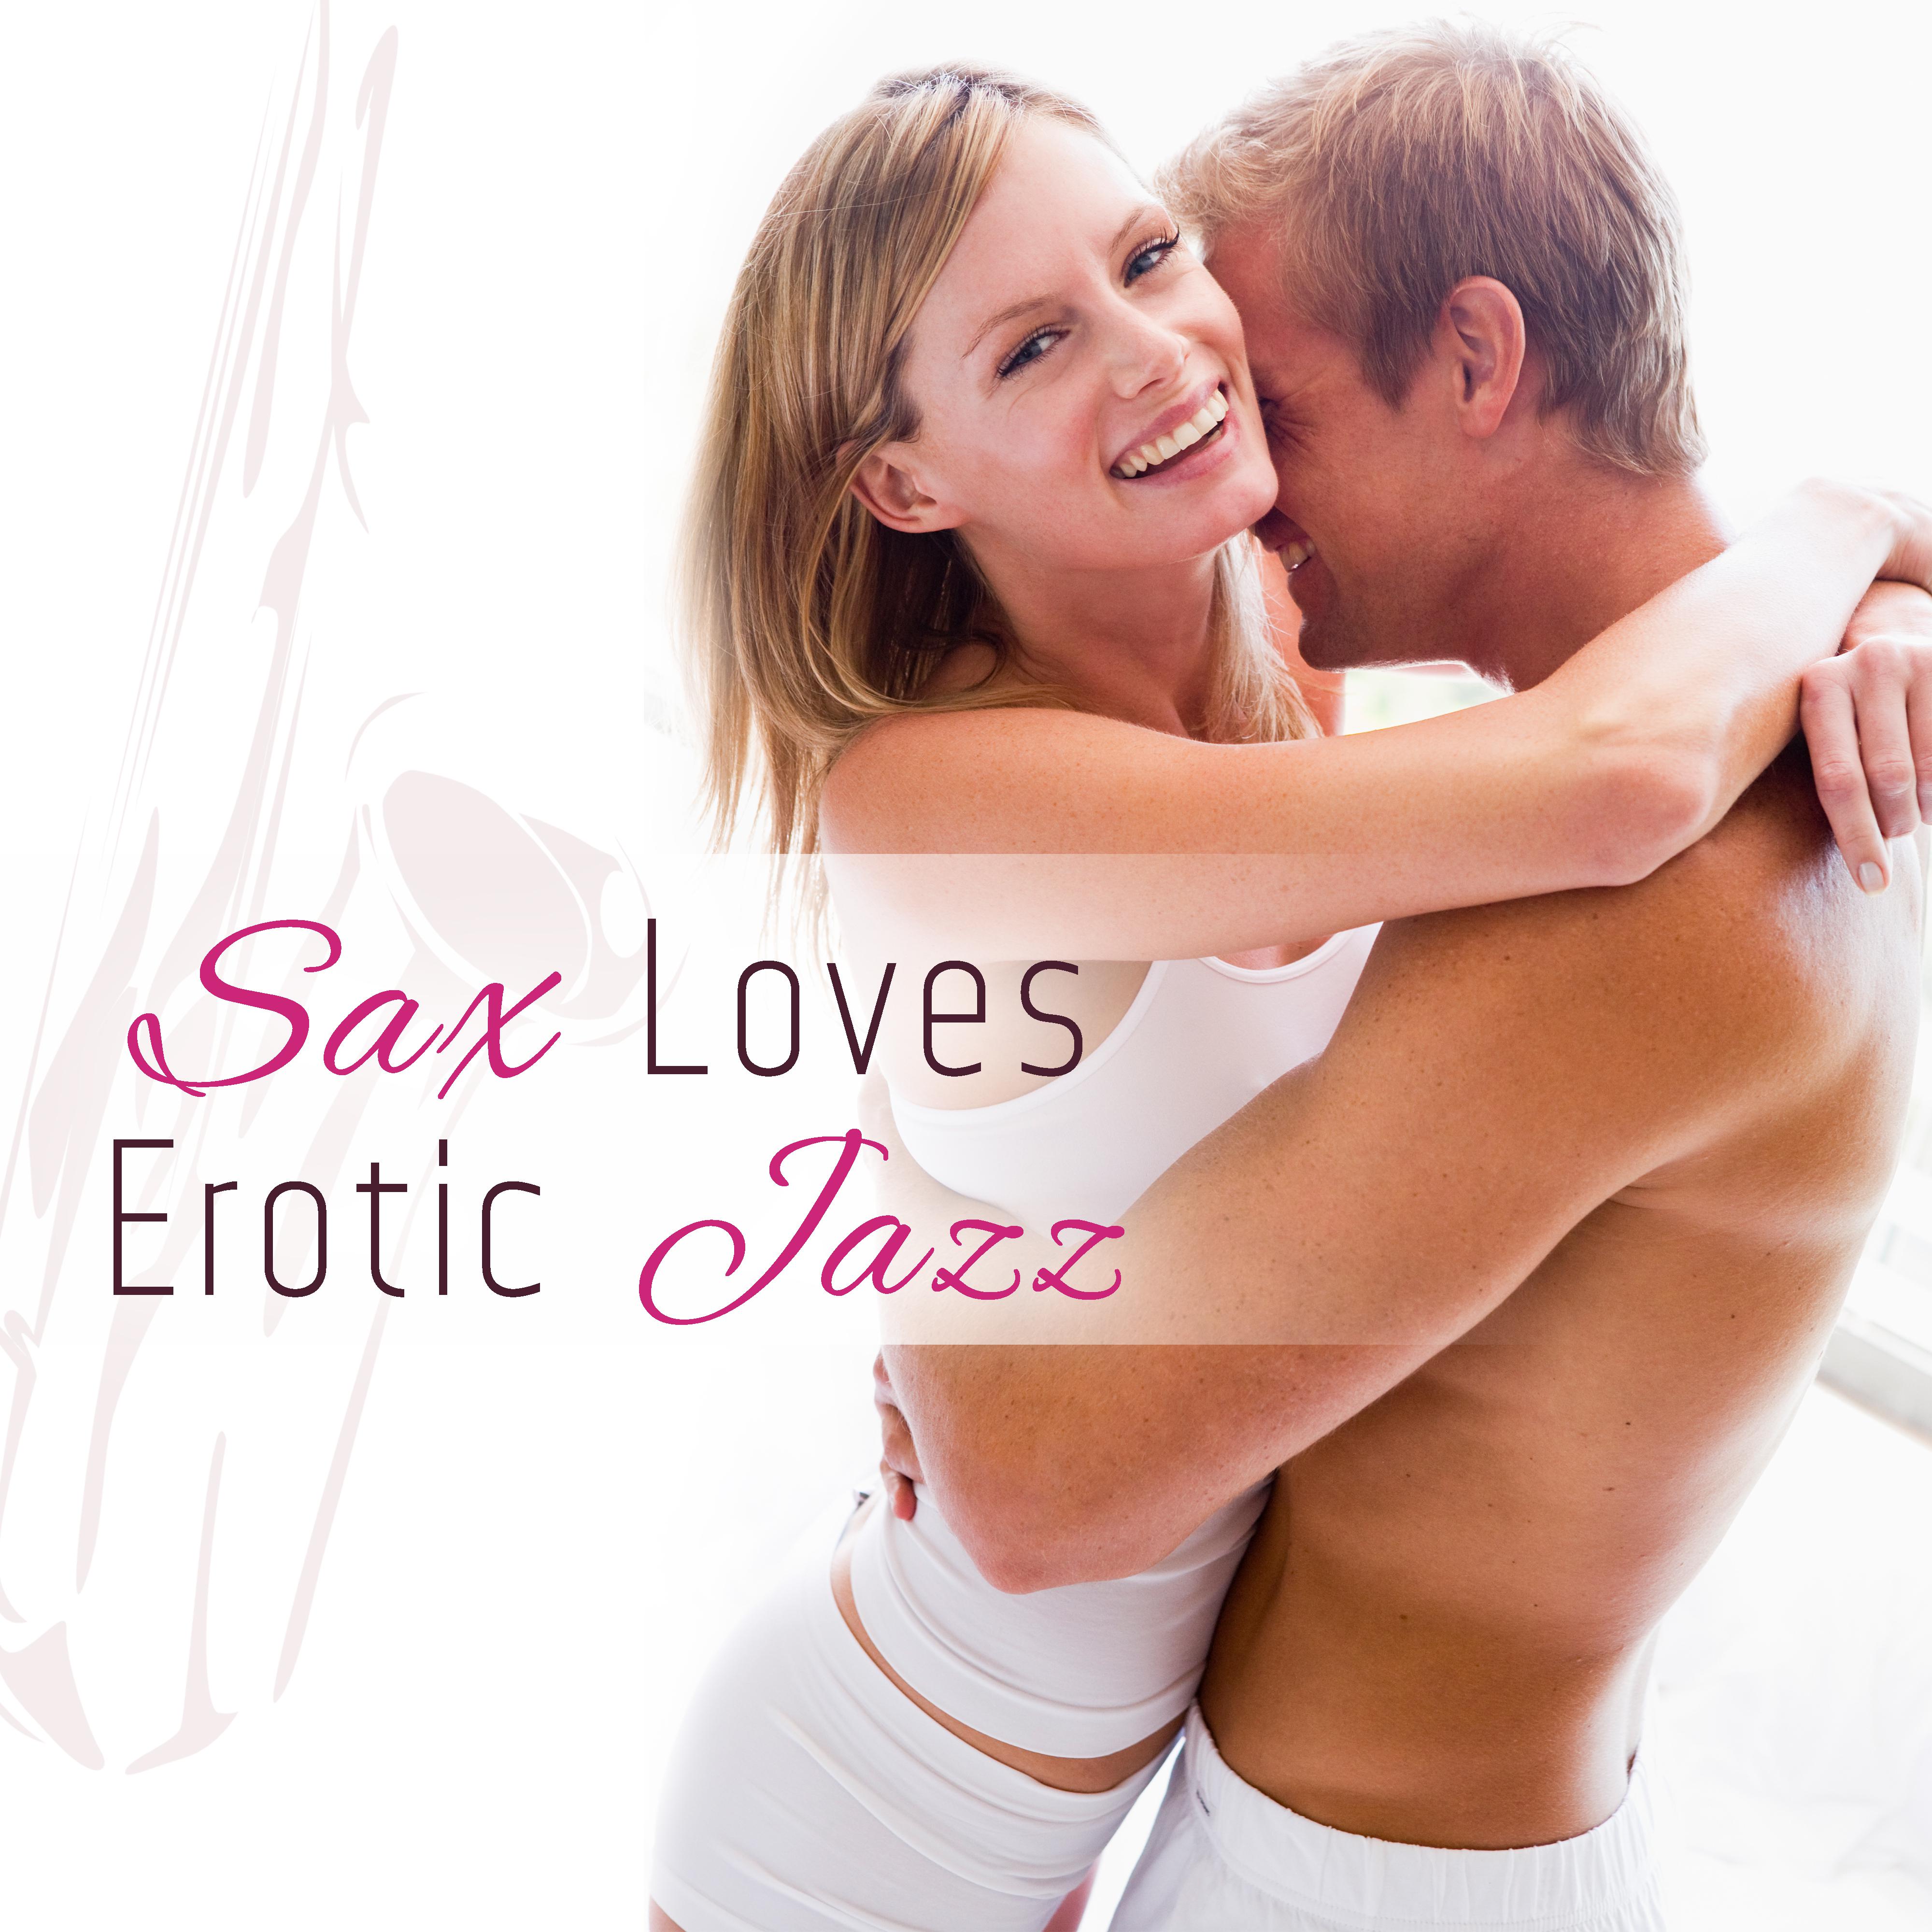 Sax Loves Erotic Jazz – Sensual Music for Lovers, Pure Desires, Erotic Games for Two, Smooth Jazz for Making Love